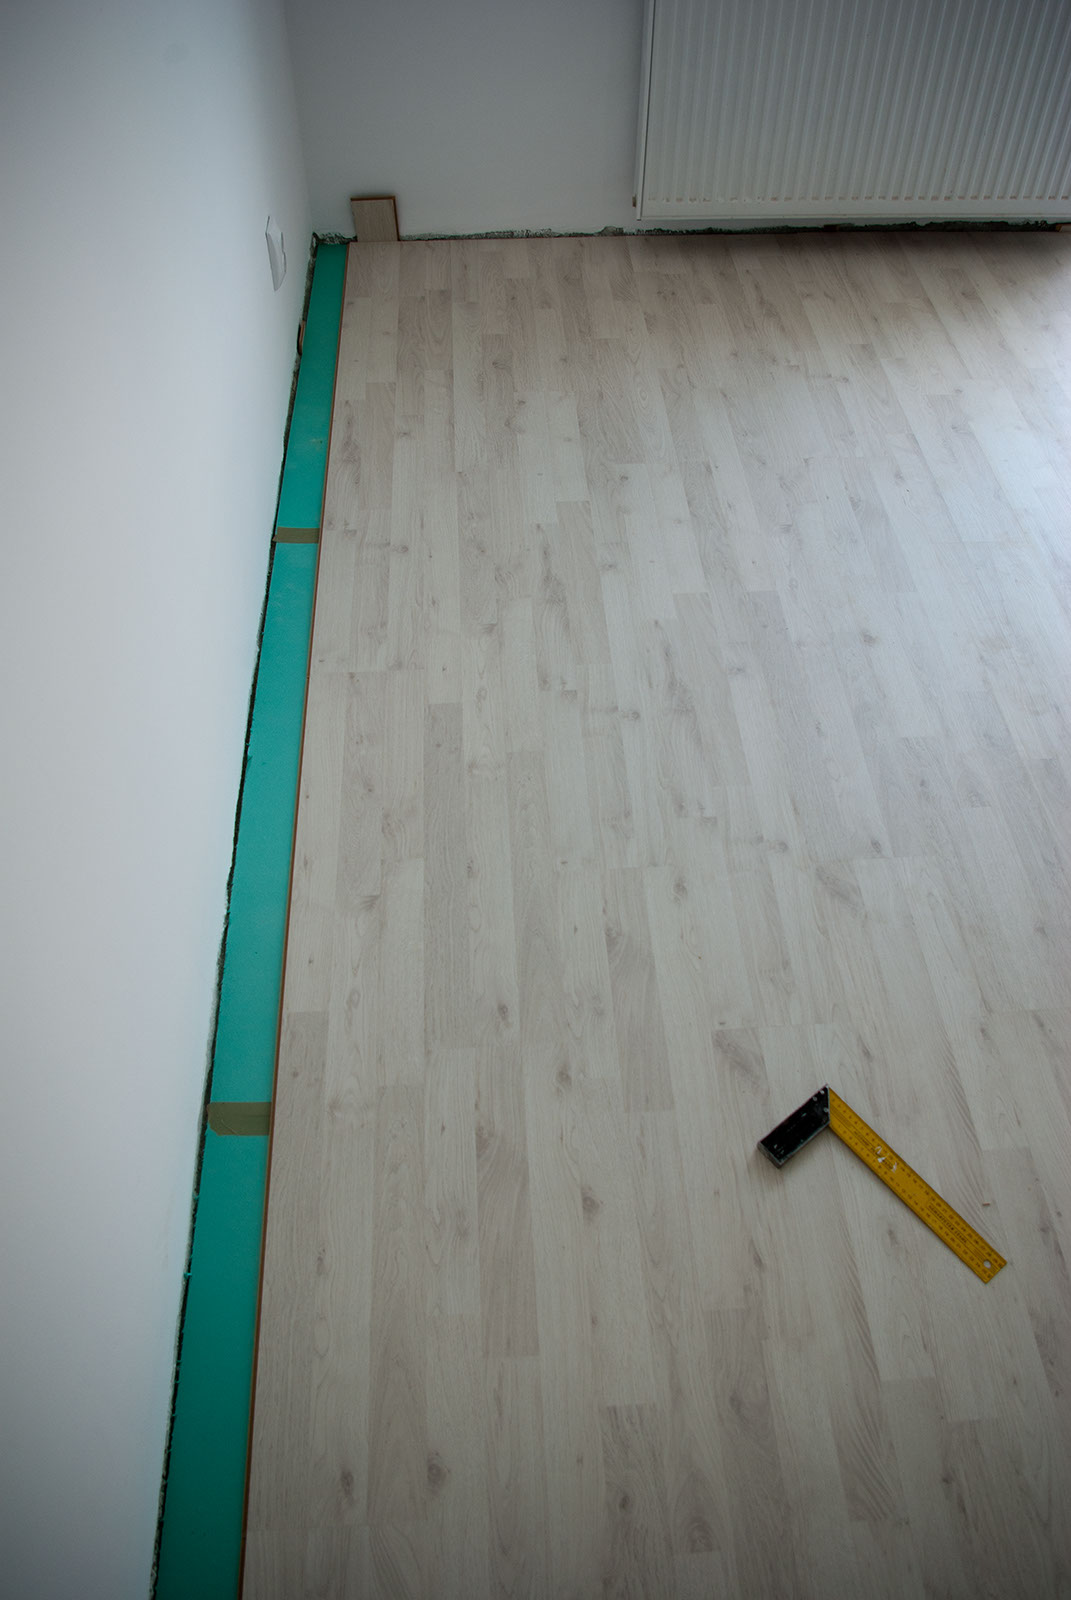 How To Install Laminate Flooring, How To Lay Laminate Flooring Against A Wall